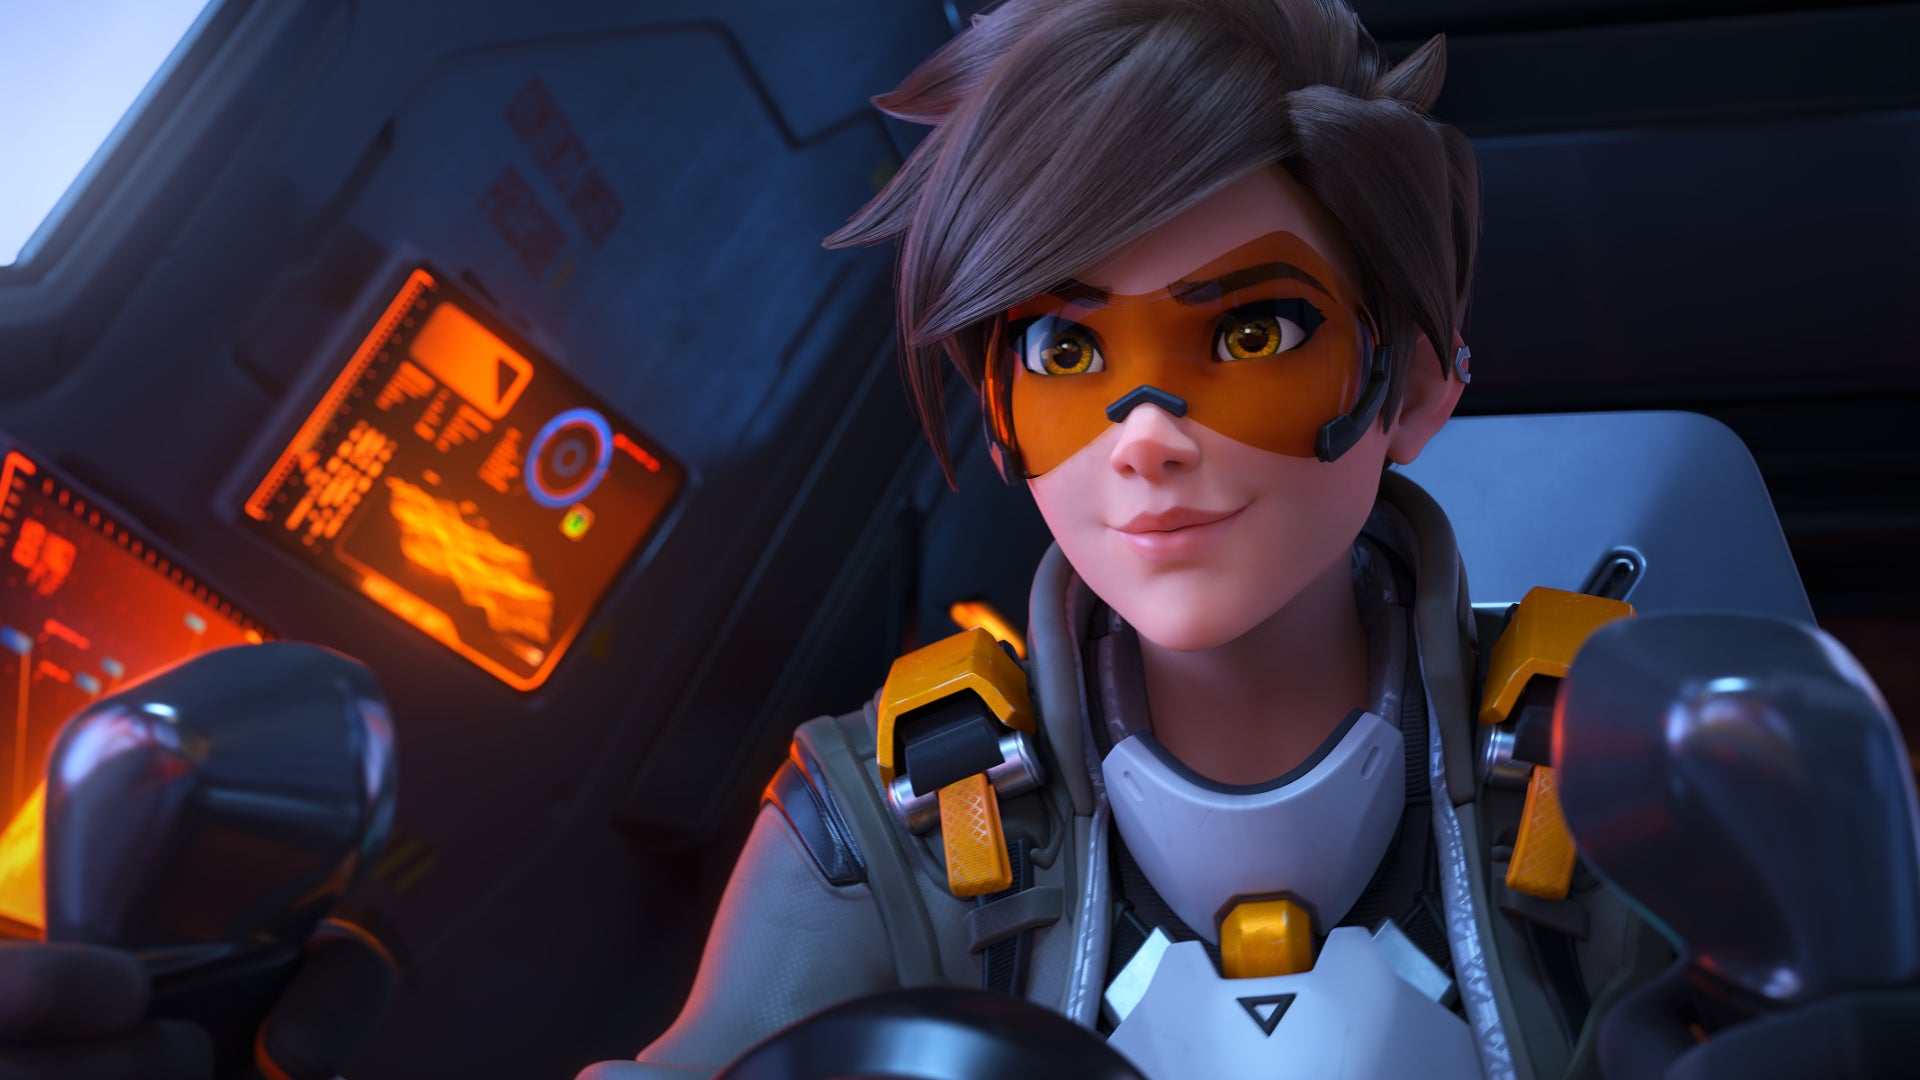 Tracer, a hero from Overwatch 2, looks past the camera while piloting a ship.